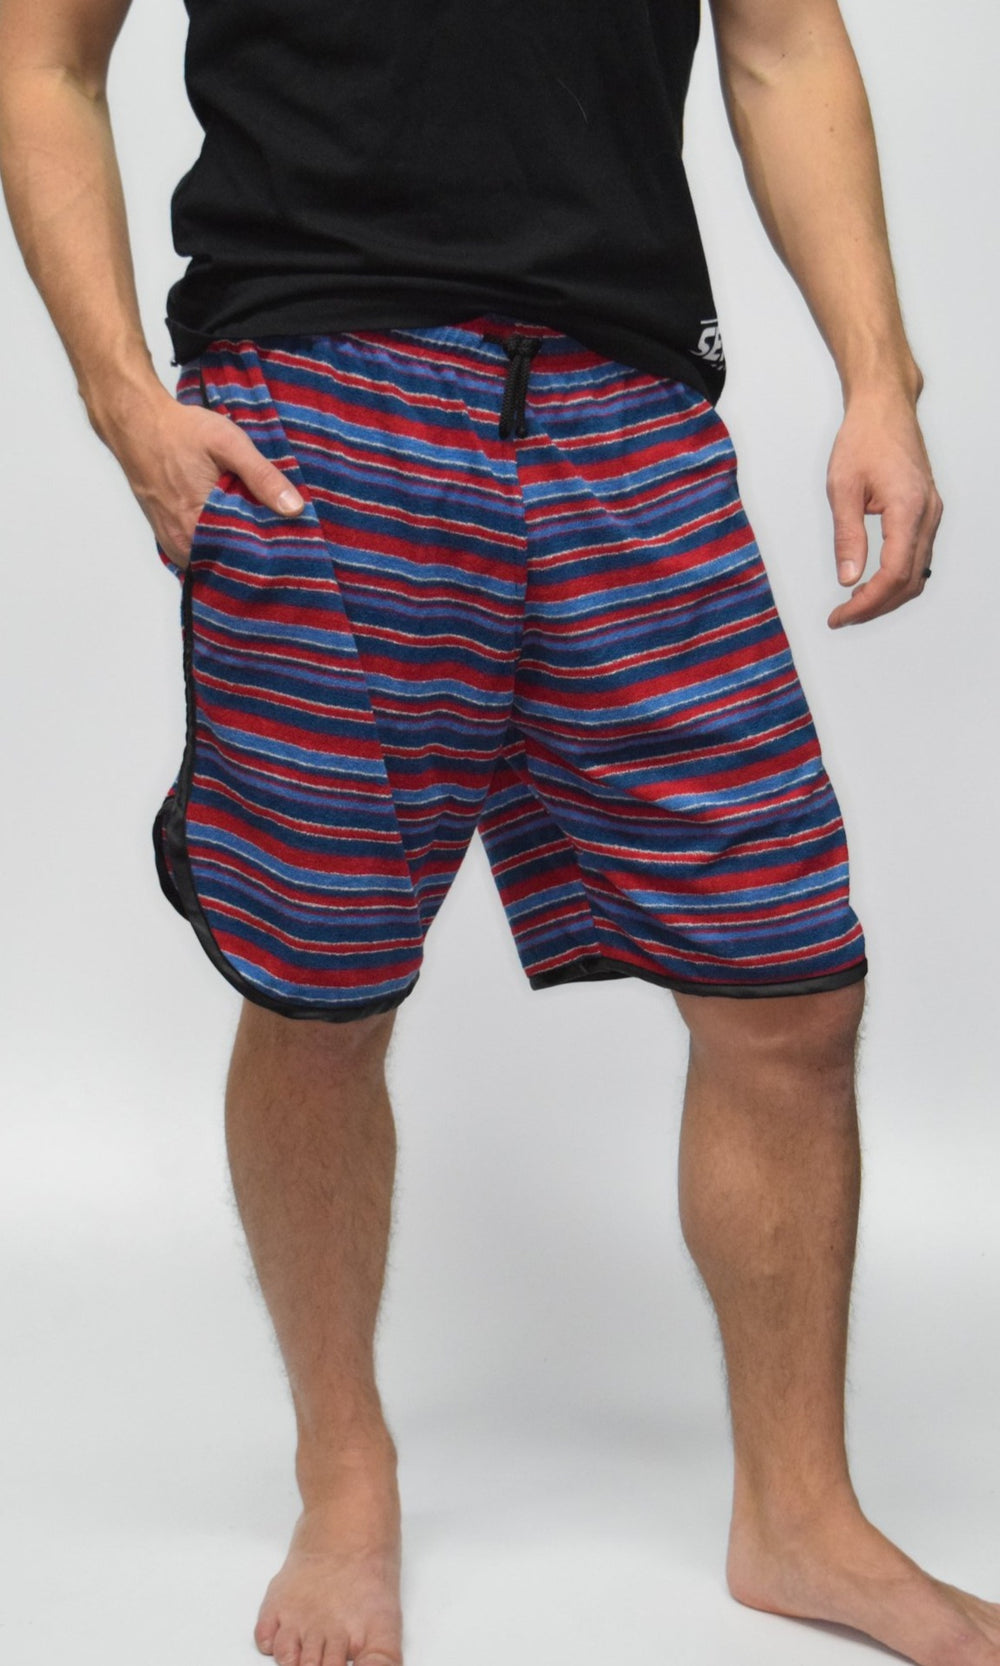 Men's Terry-Cloth Shorts in Blue/Red